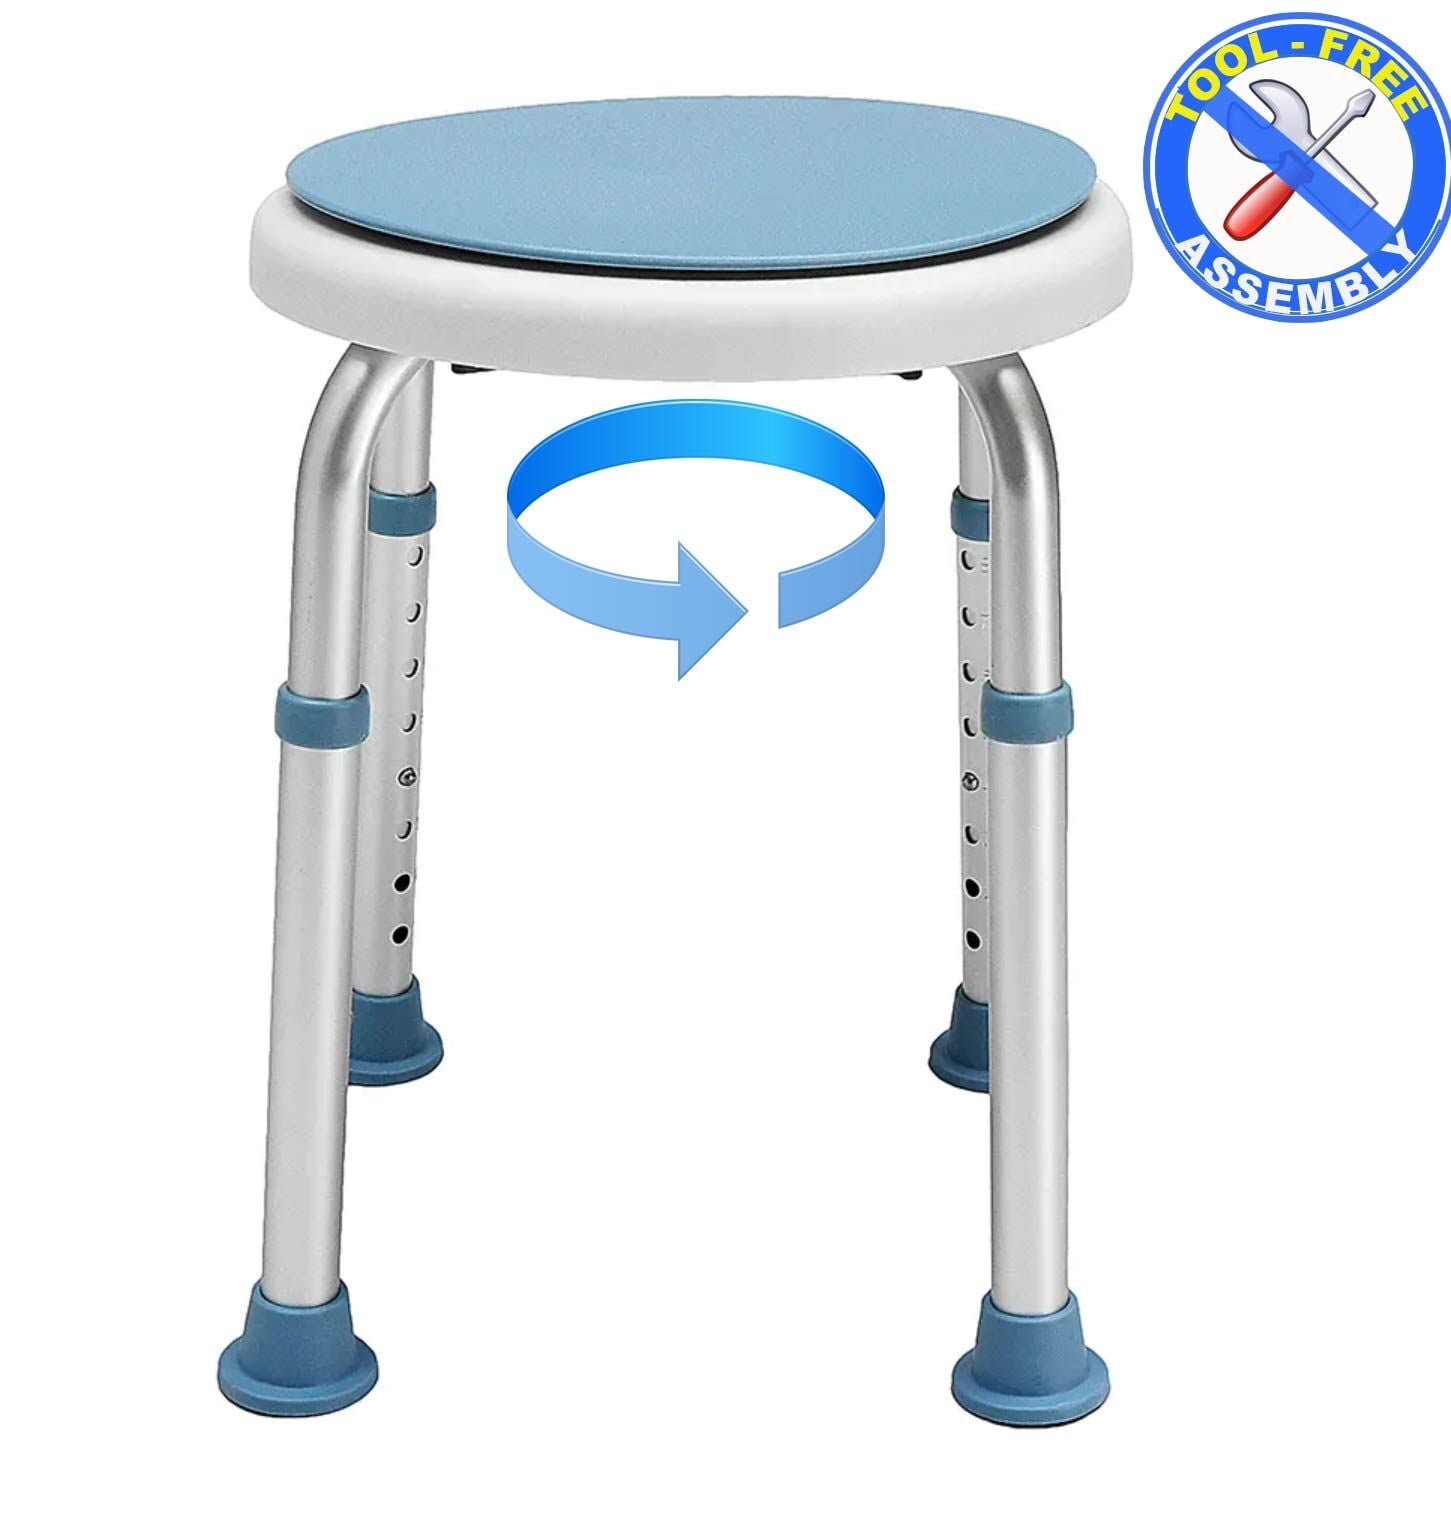 verdamping zaterdag Meetbaar Shower Stool Swiveling Adjustable Chair Seat - Round Rotating Safety Bath  Seat With Anti-Slip Rubber Tips for Safety and Stability For Seniors,  Elderly, Handicap, Disabled - Walmart.com